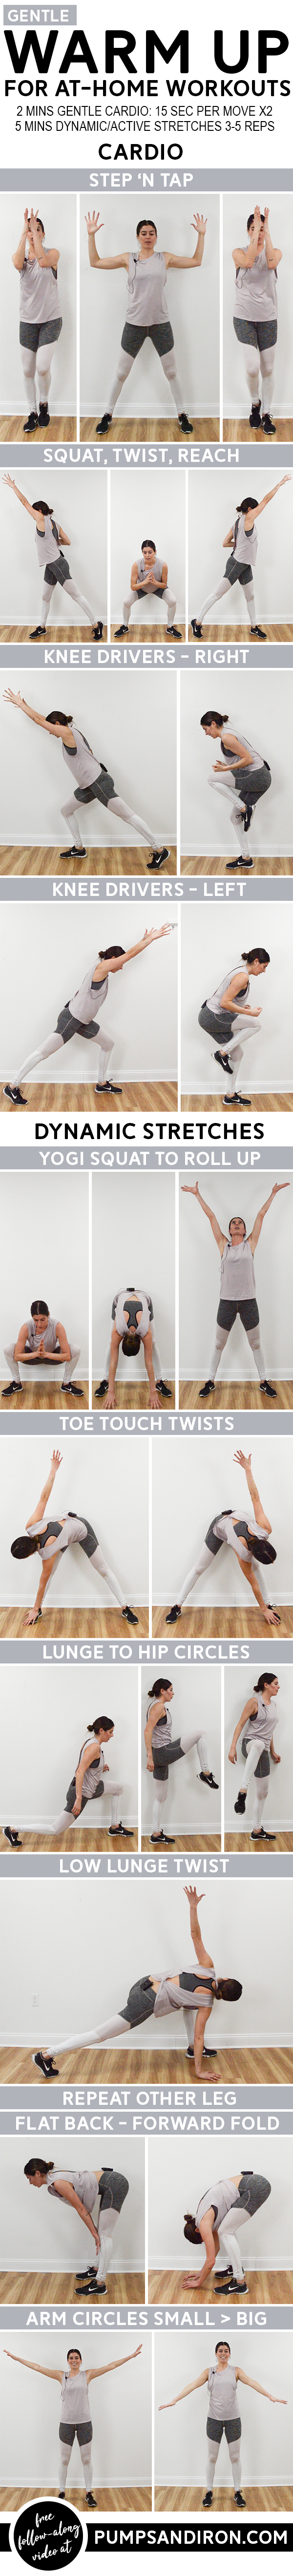 Gentle Warm Up for At-Home Workouts